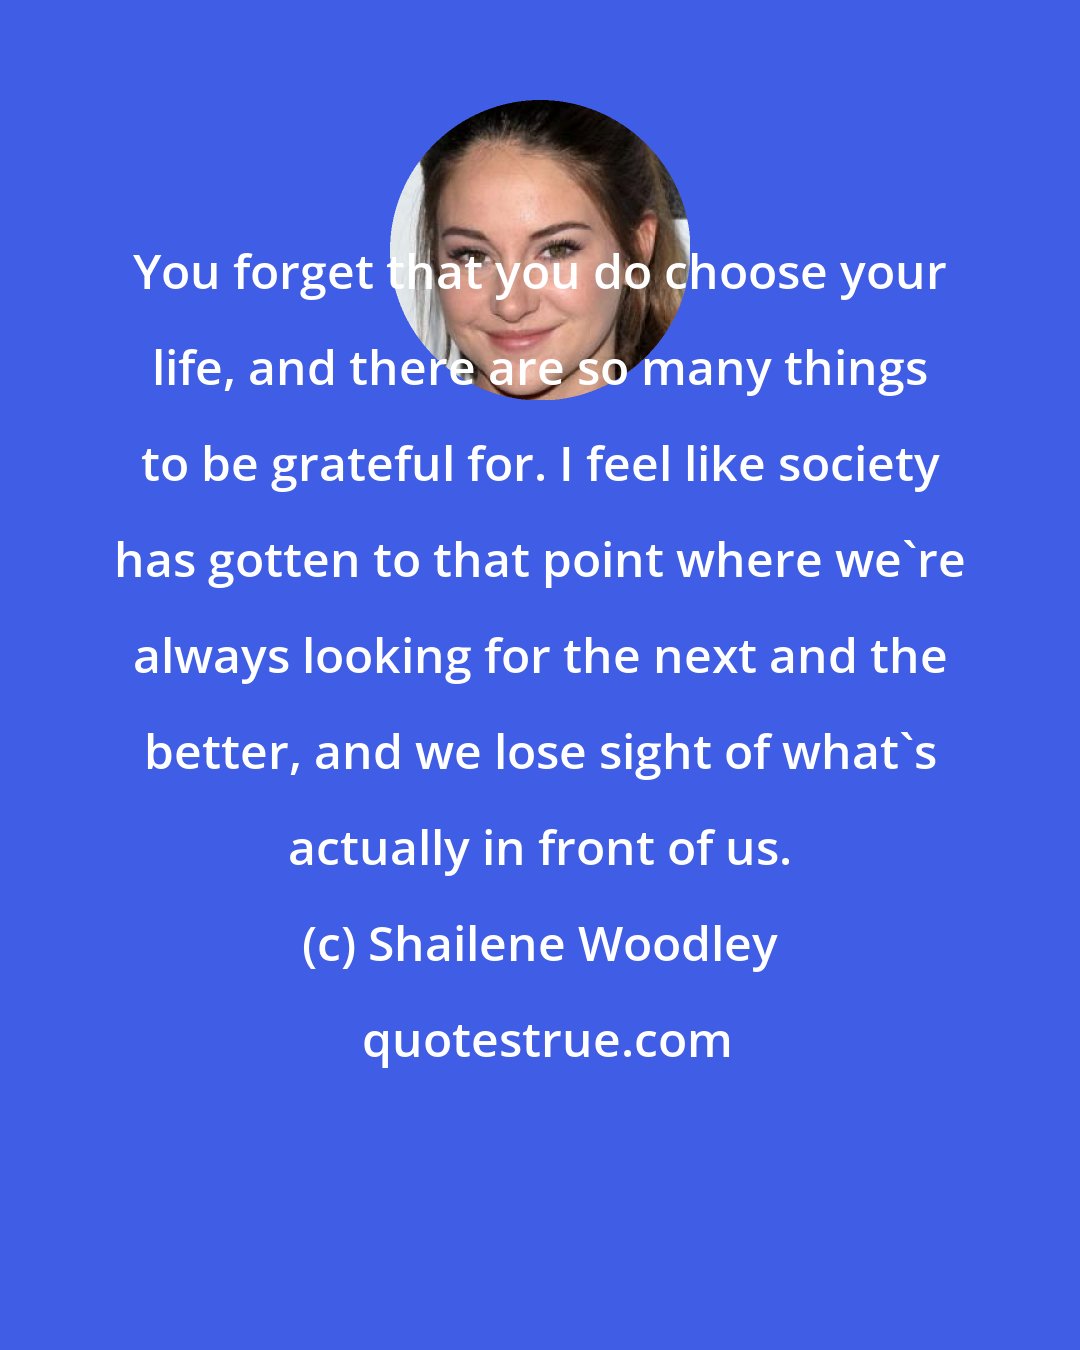 Shailene Woodley: You forget that you do choose your life, and there are so many things to be grateful for. I feel like society has gotten to that point where we're always looking for the next and the better, and we lose sight of what's actually in front of us.